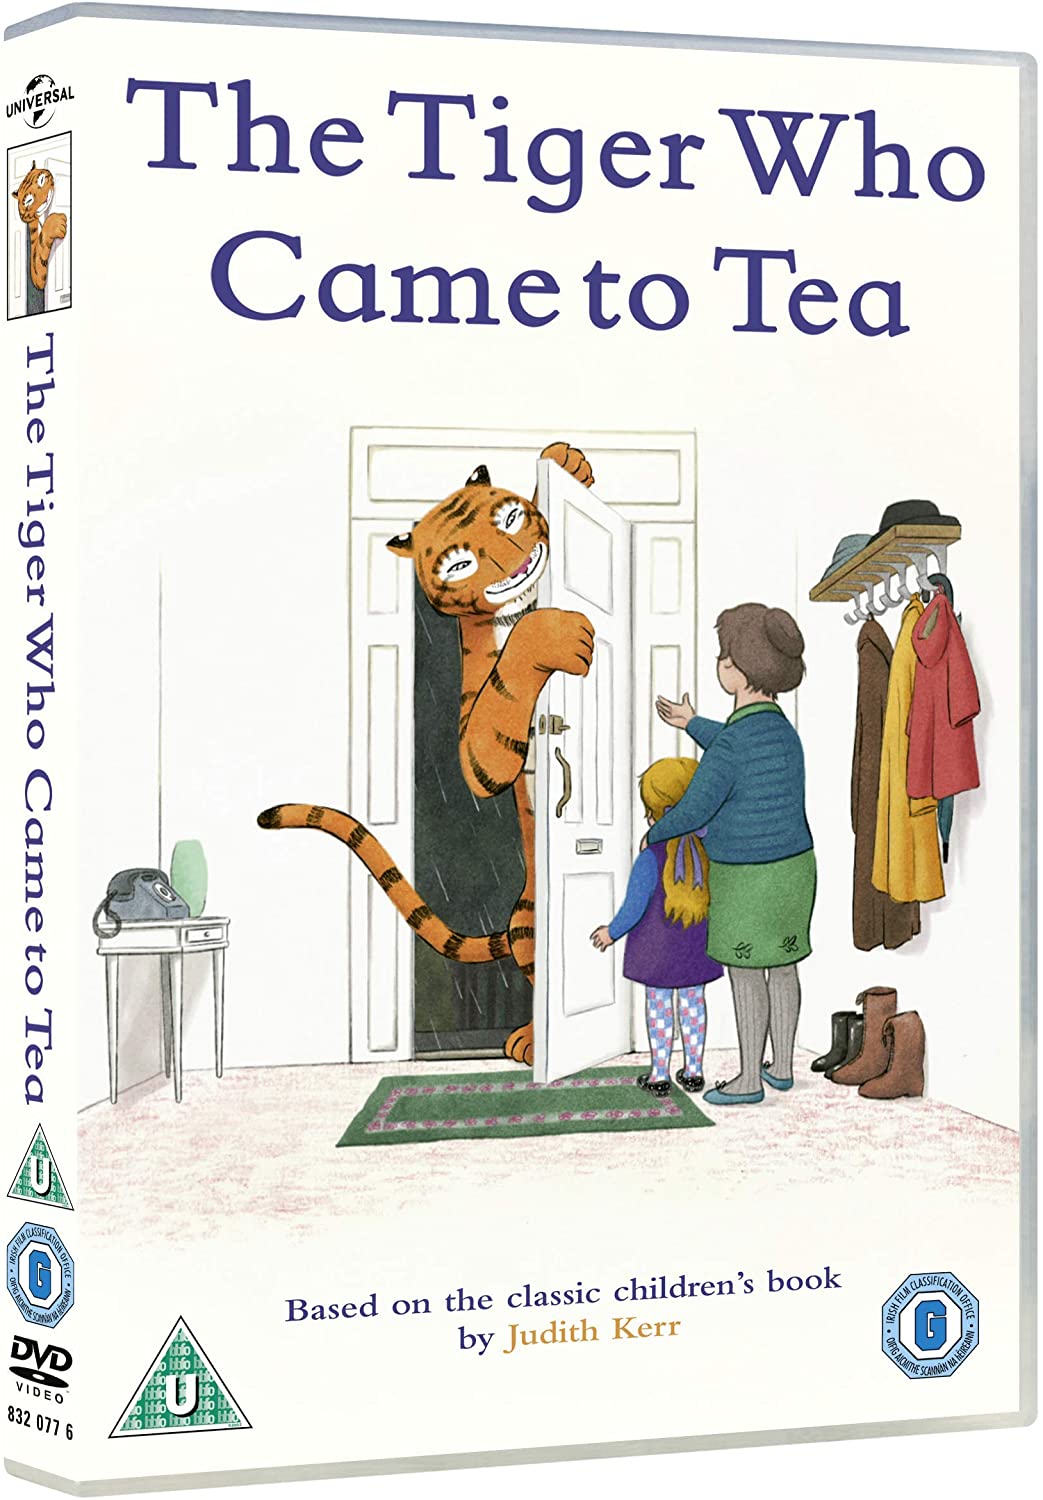 The Tiger Who Came to Tea - Short/Animation [DVD]